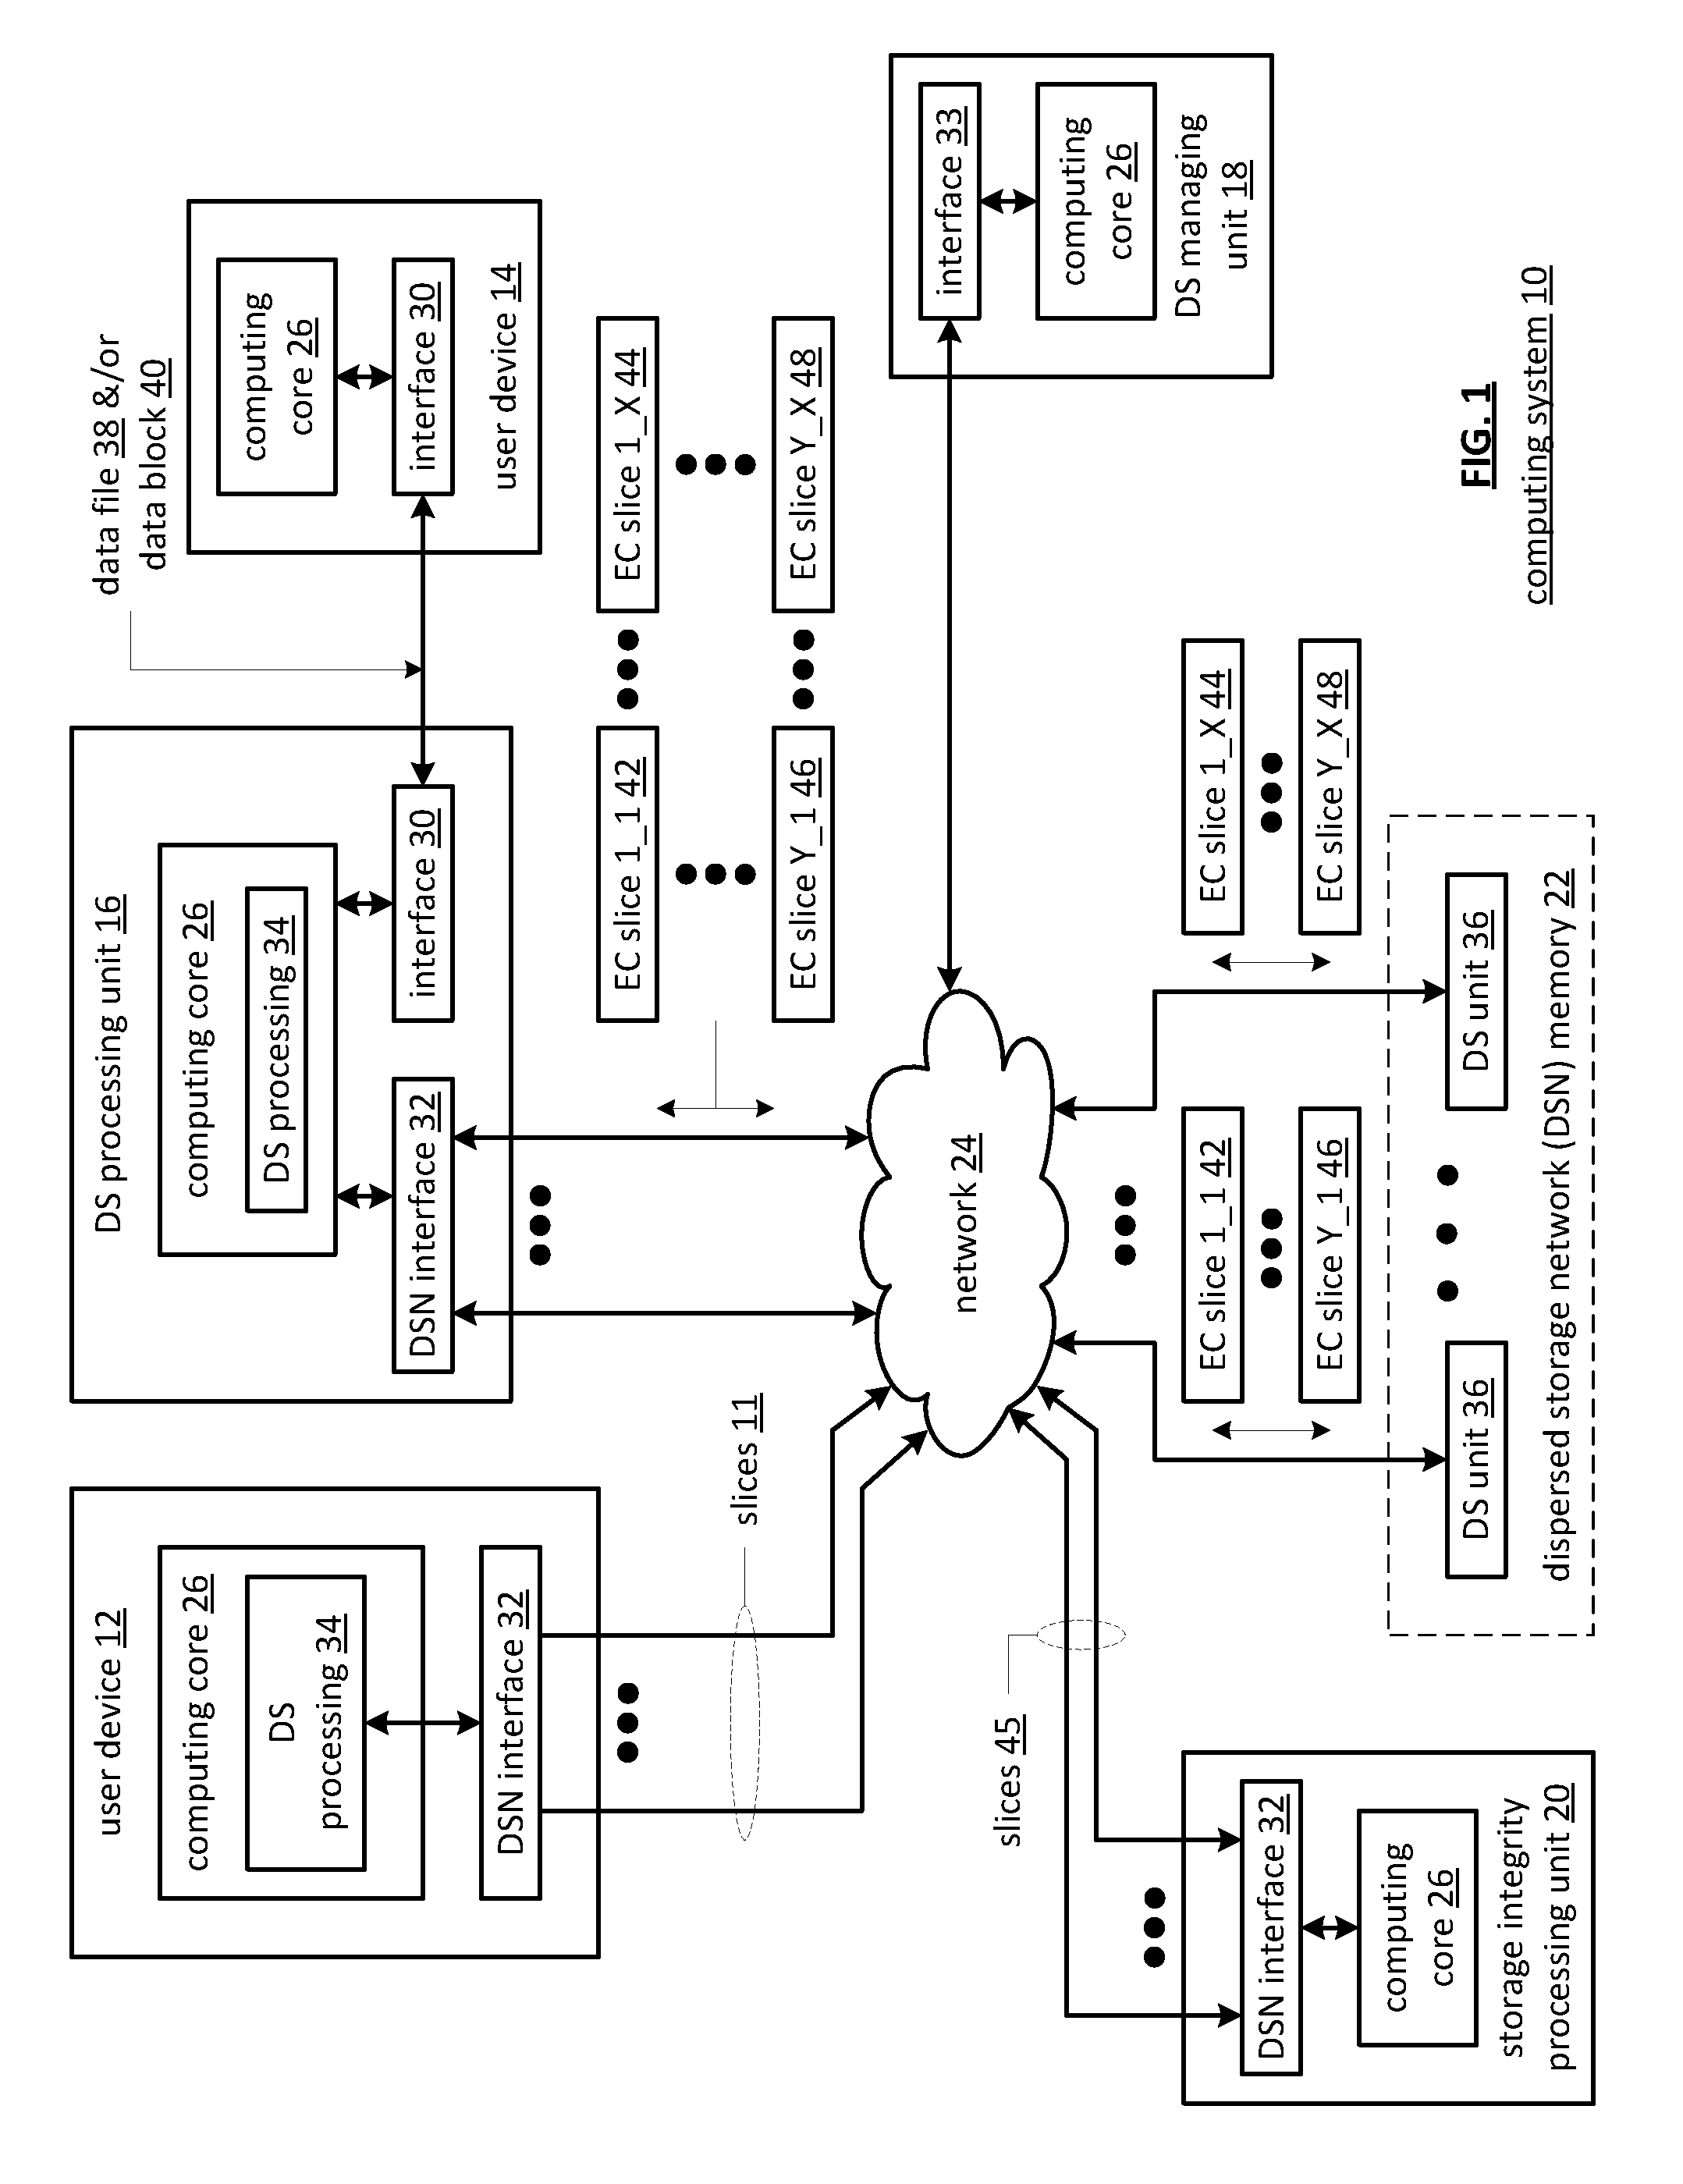 Large scale subscription based dispersed storage network